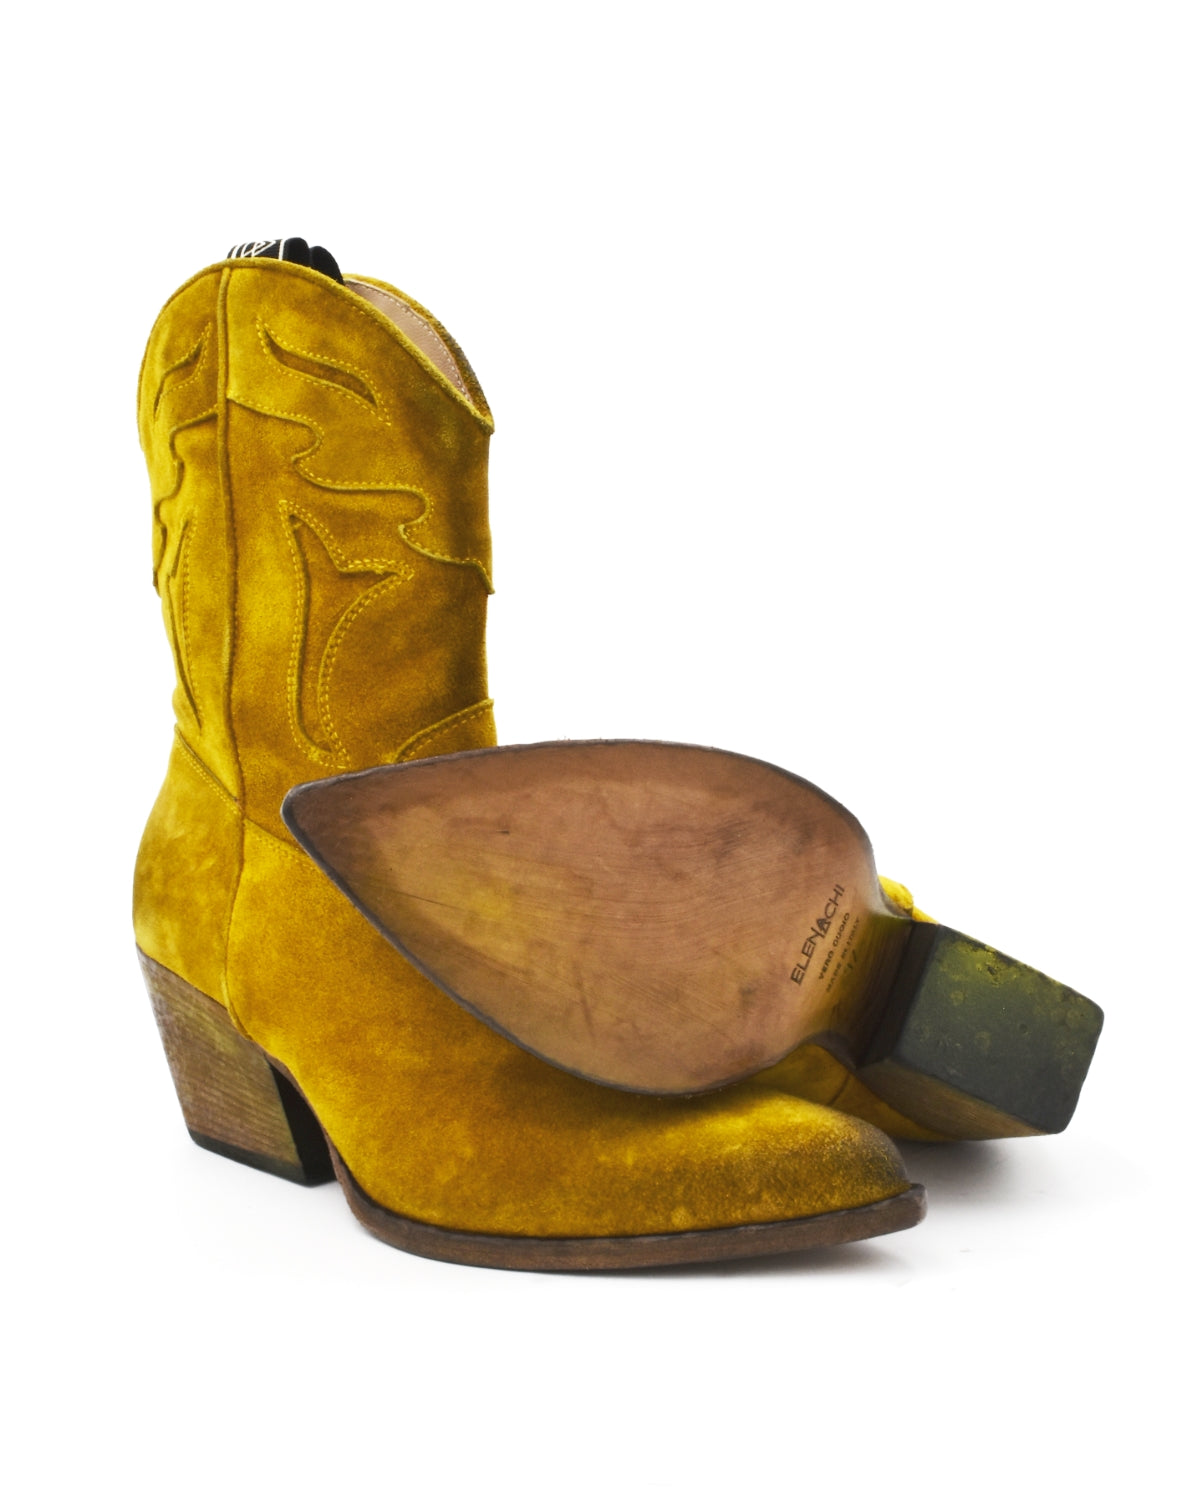 Women's Italian Dip Dyed "Citron" Suede Western Boot